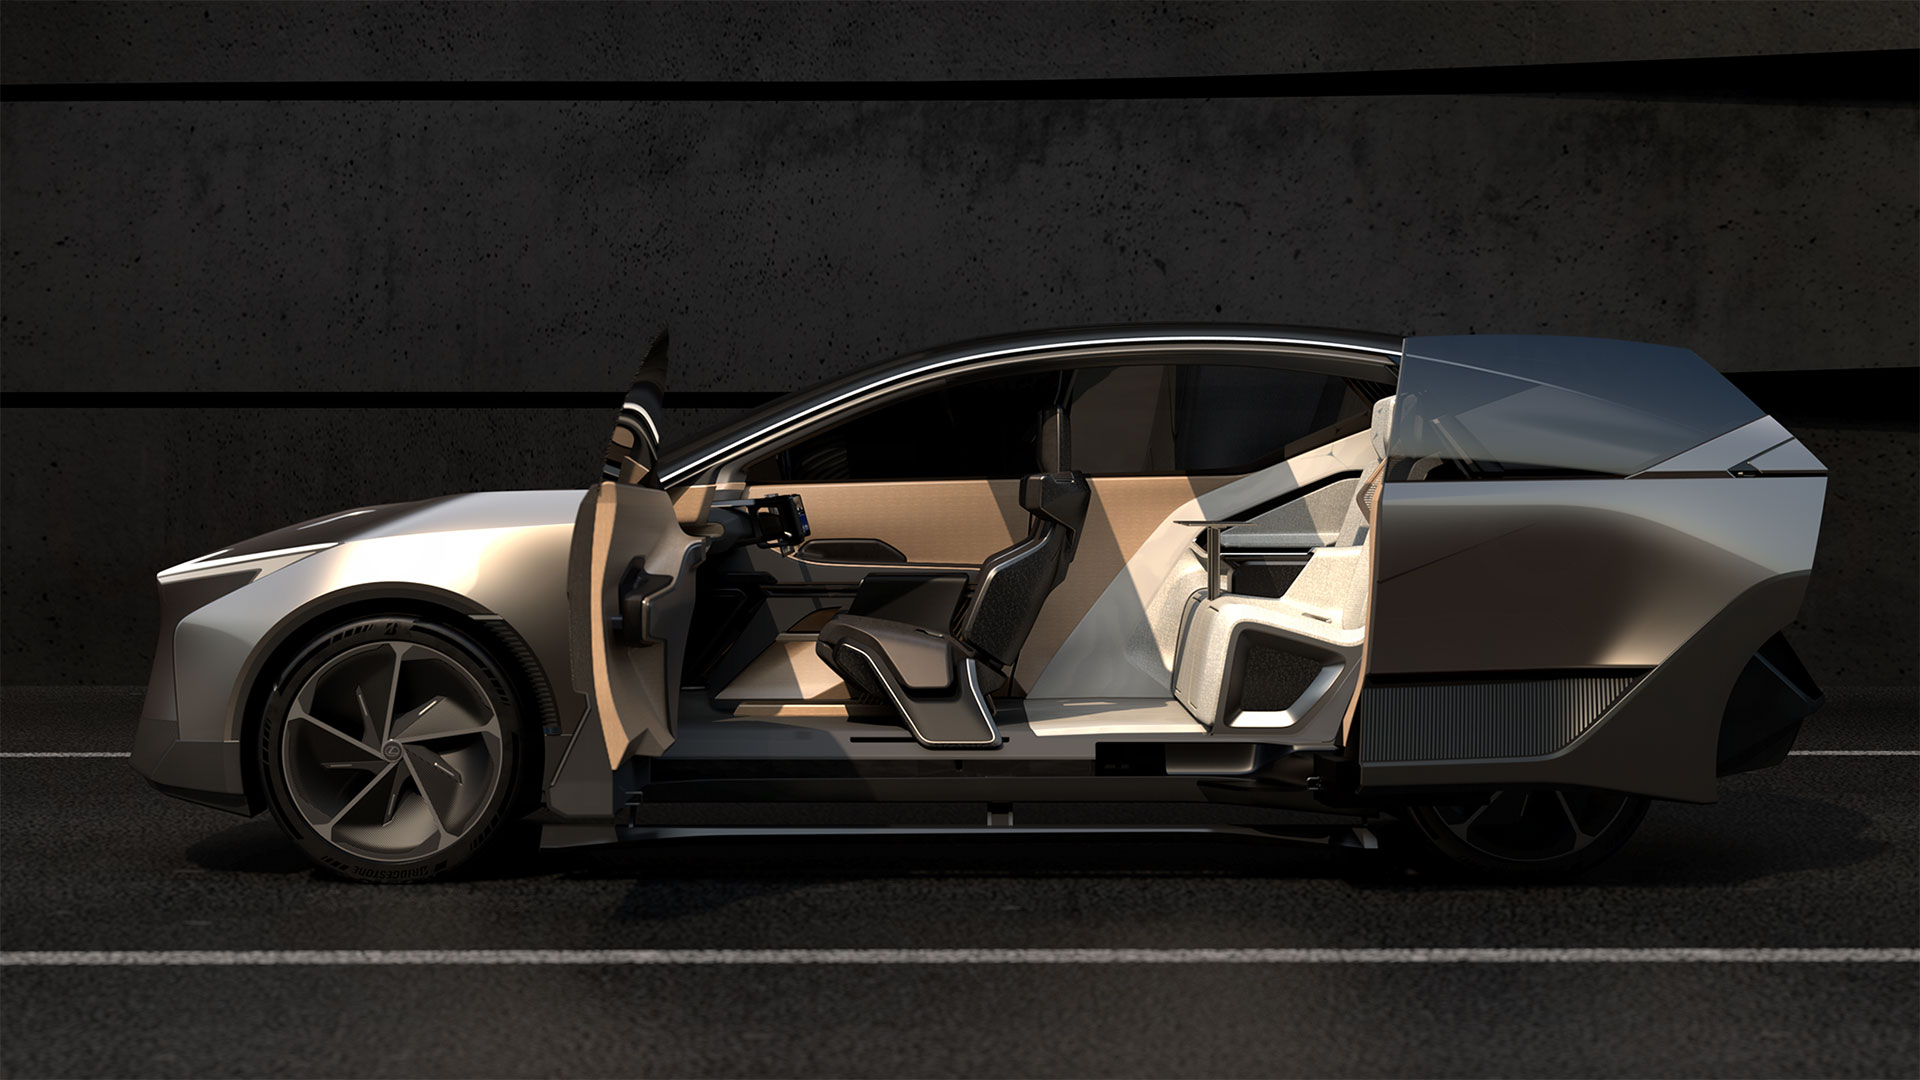 The Lexus LF-ZL Concept vehicle. Not available for purchase.